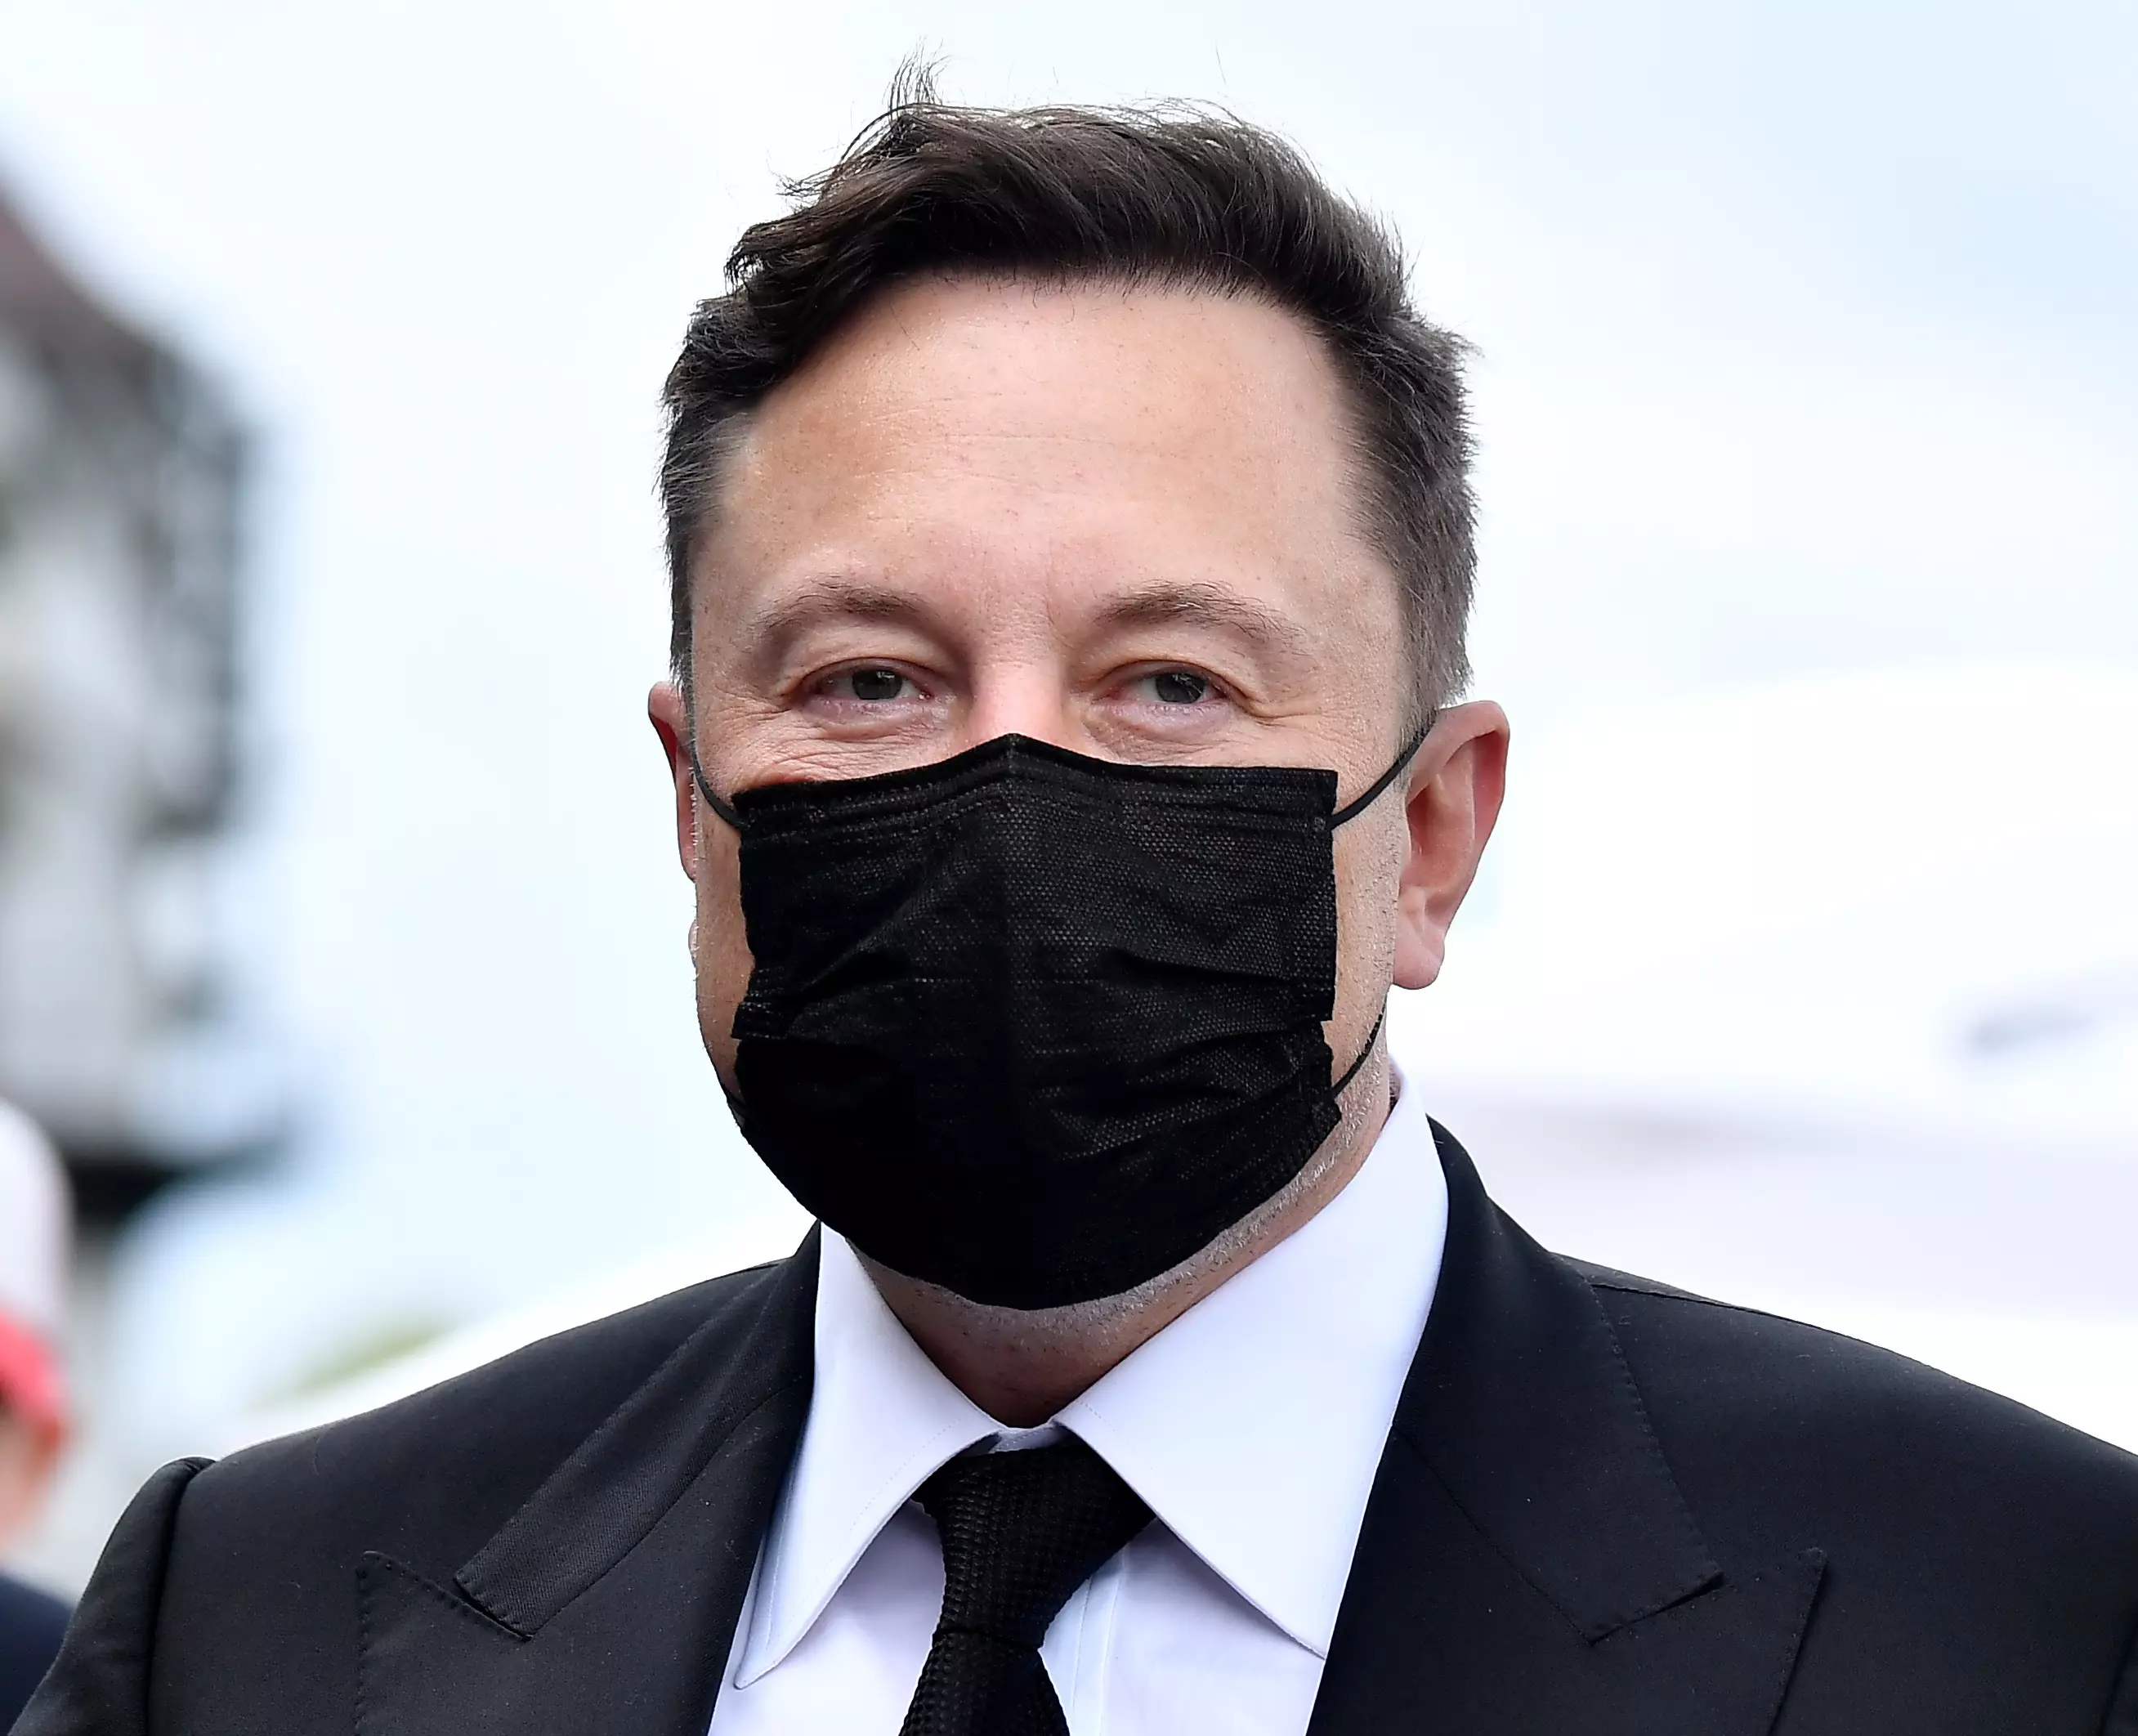 Musk obviously isn't actually an alien... right?